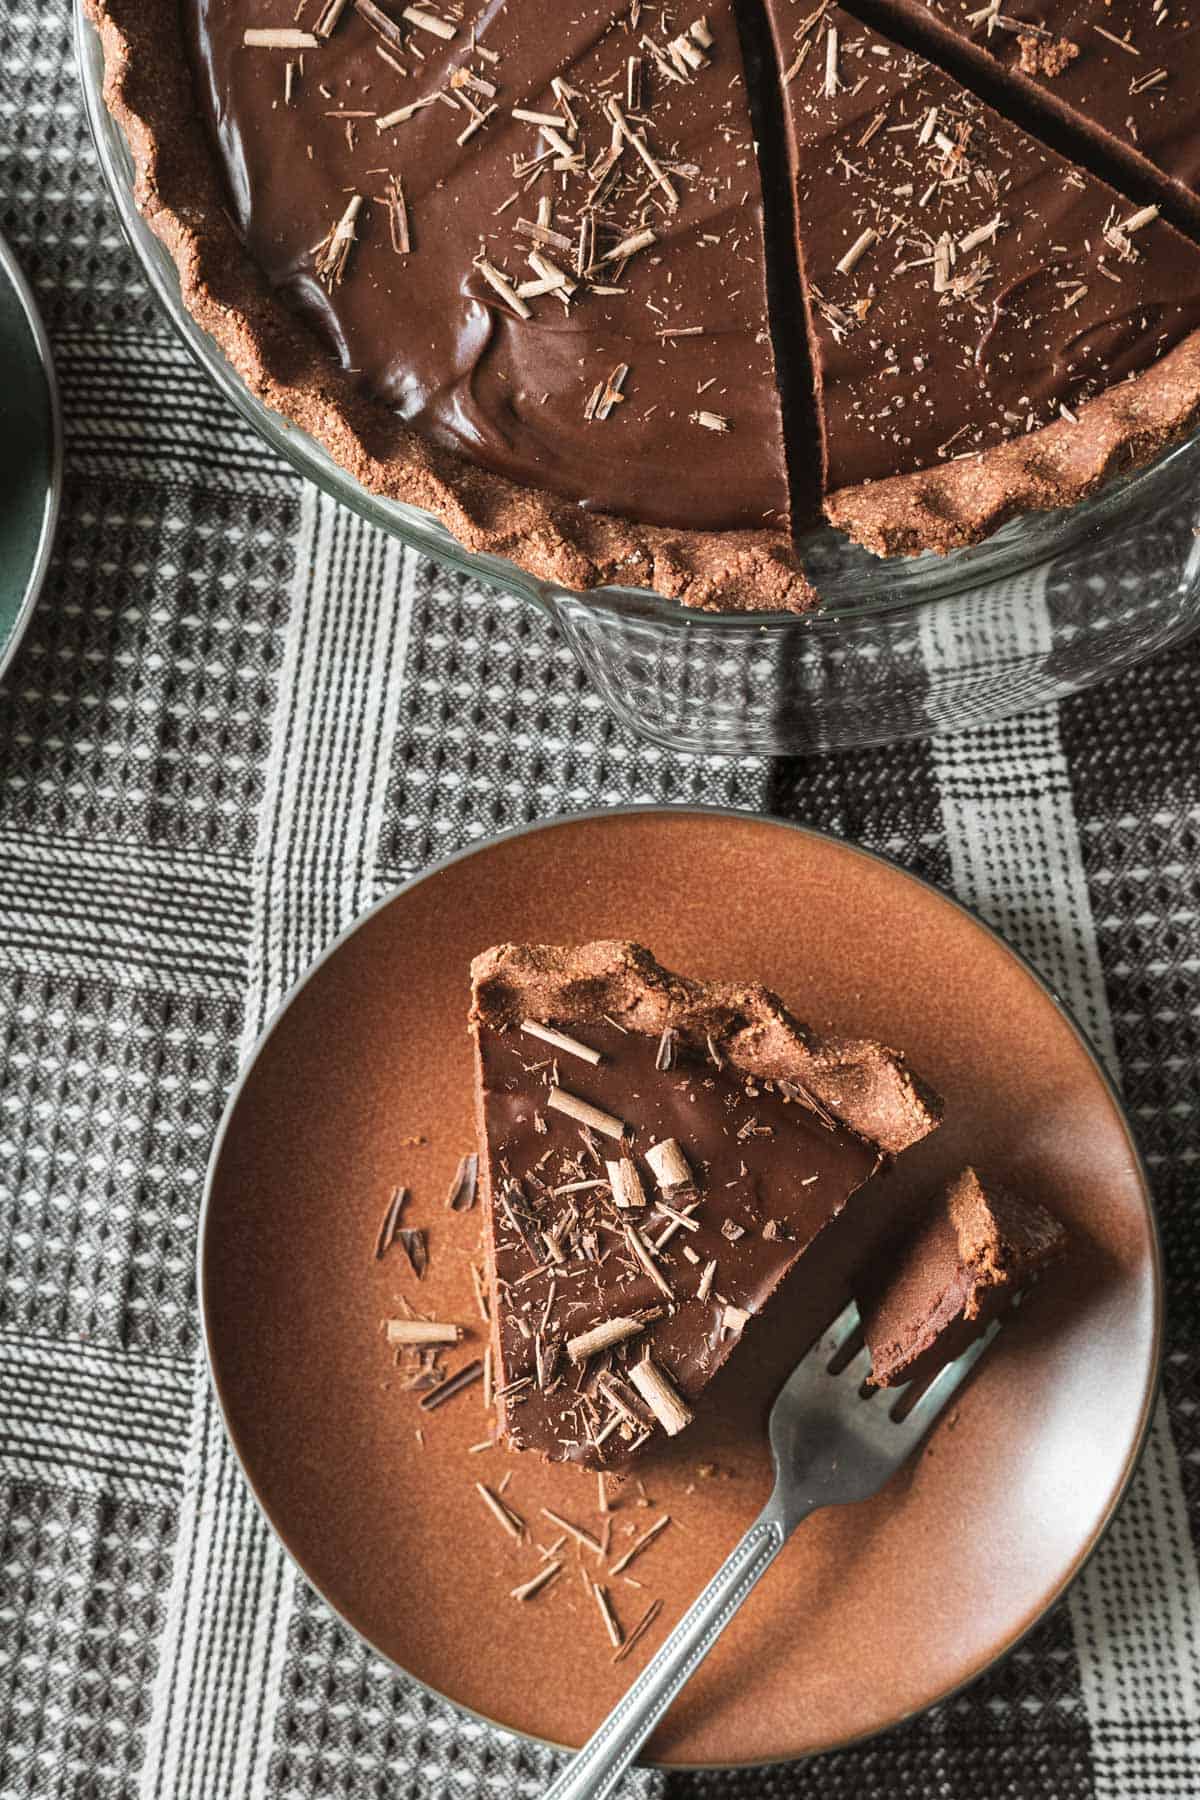 rich chocolate pie on a rust colored plate with whole pie in background.